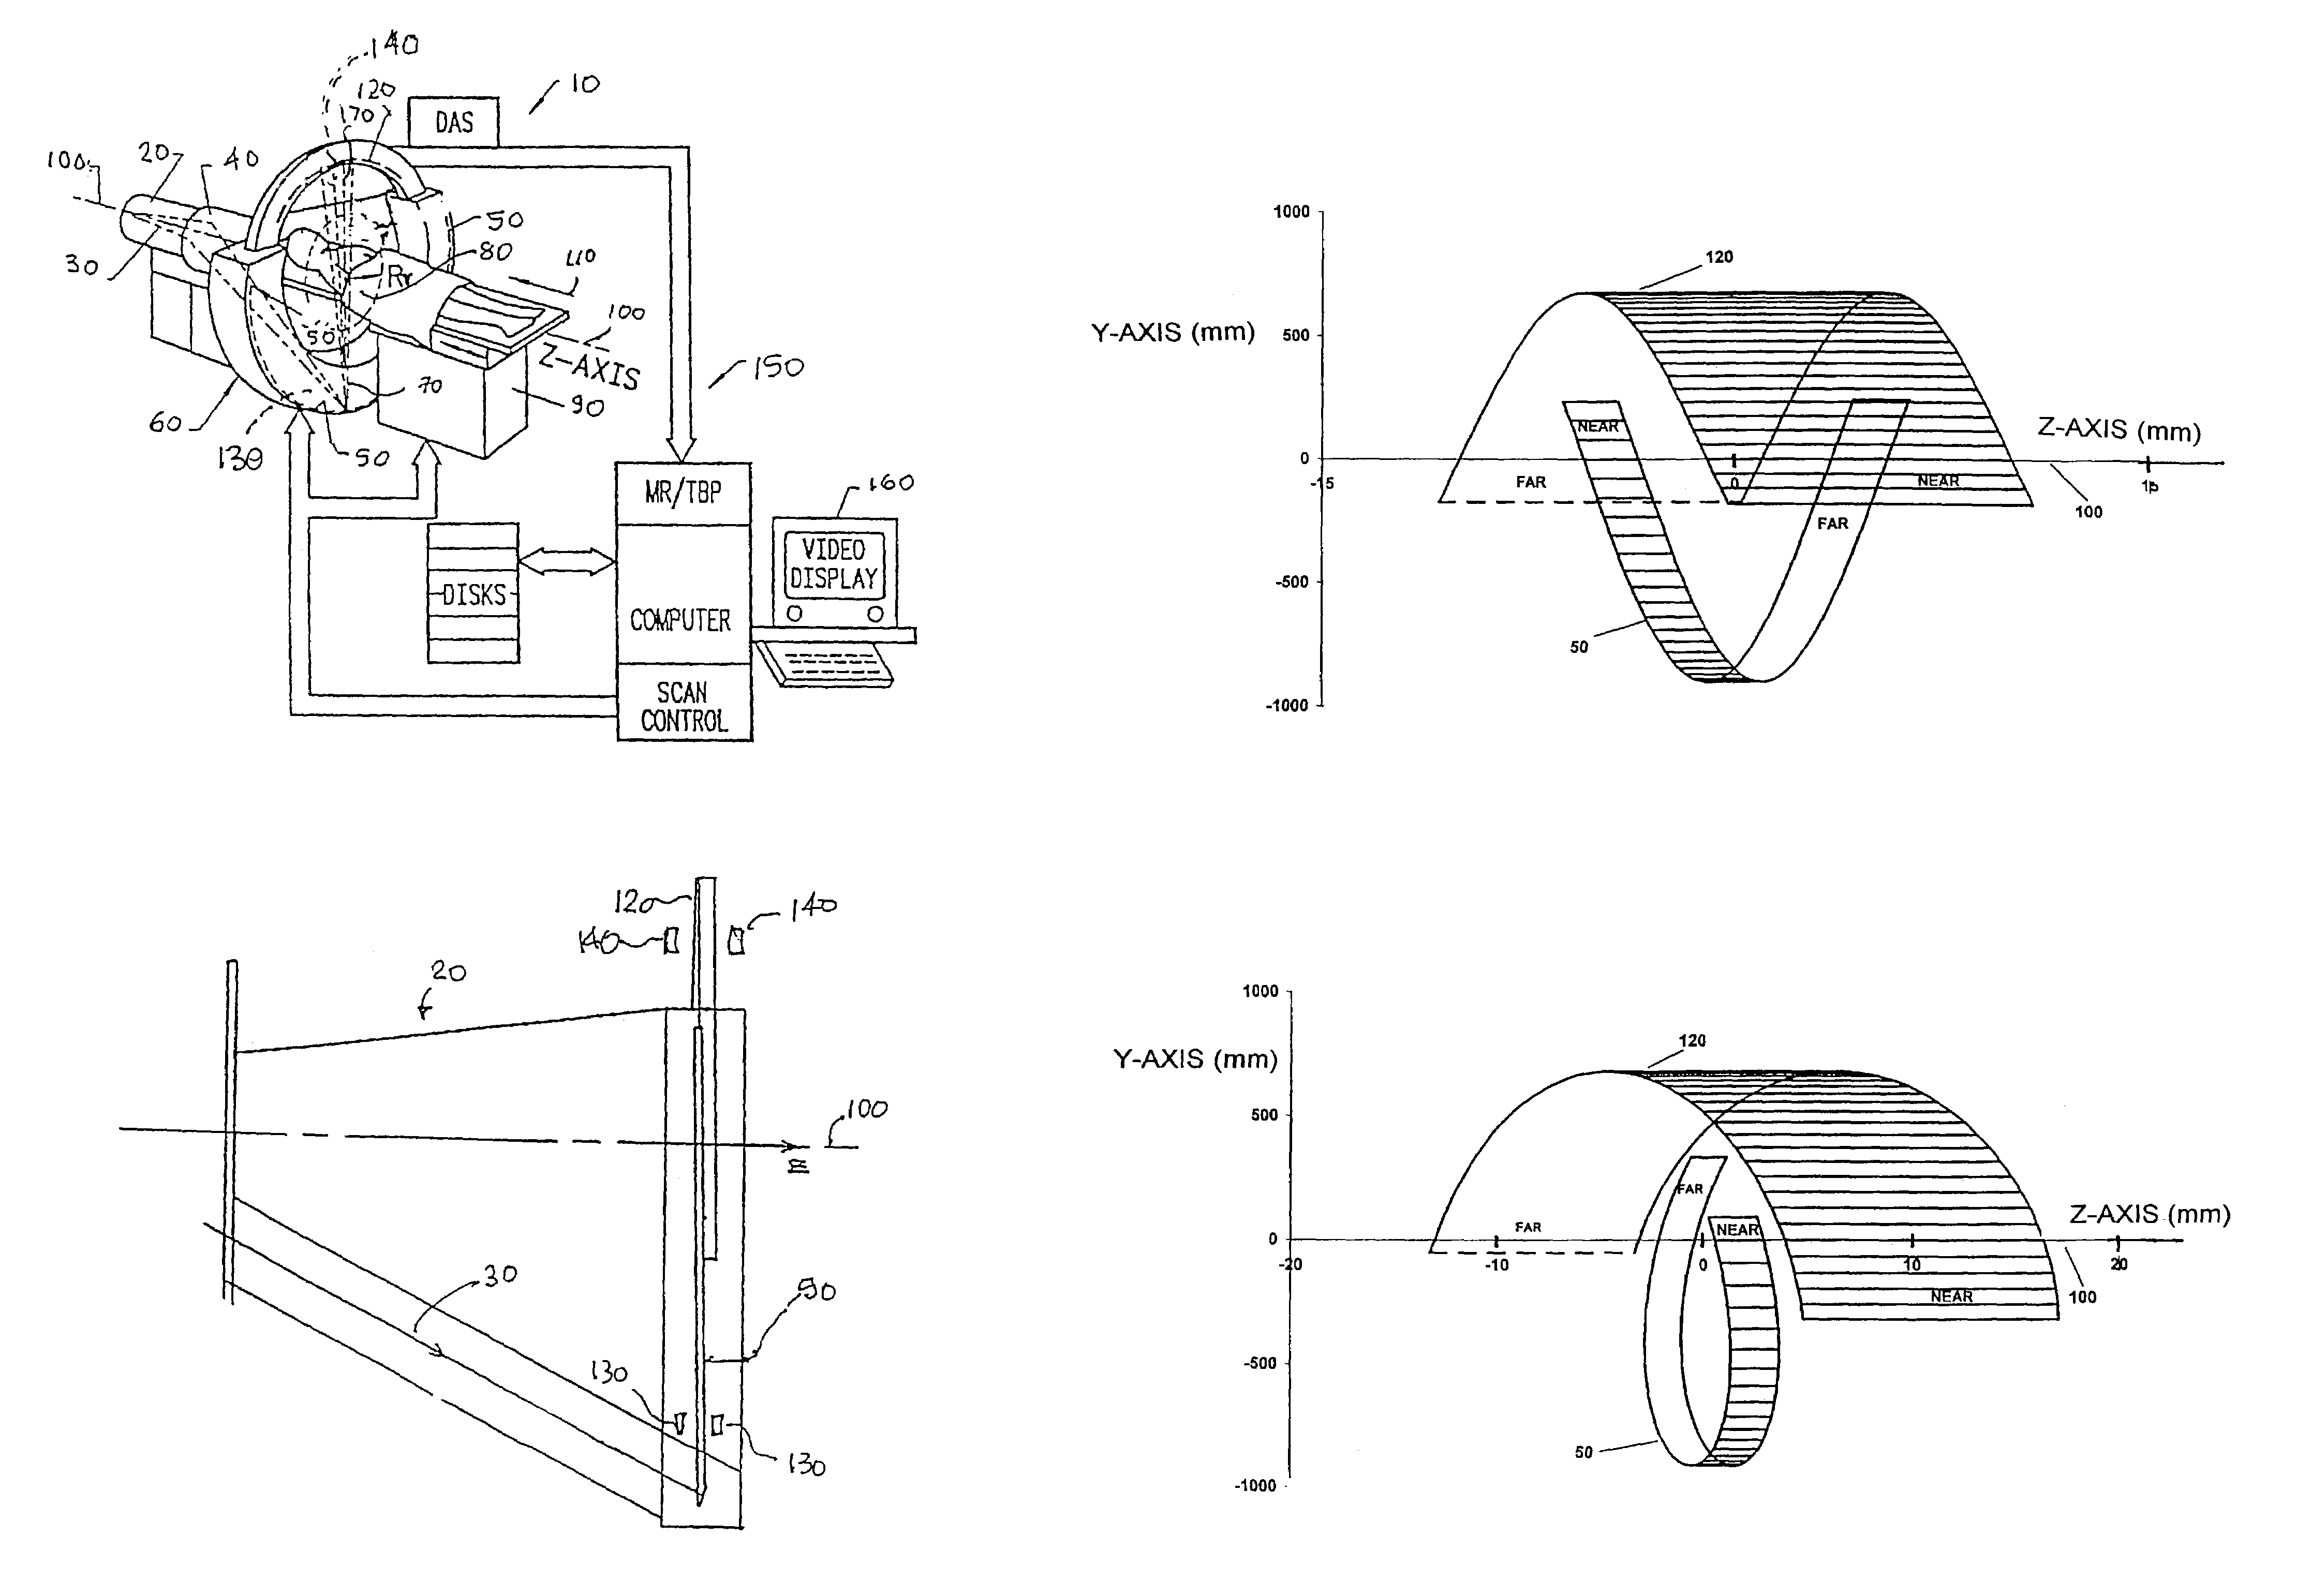 Electron beam computed tomographic scanner system with helical or tilted target, collimator and detector components to eliminate cone beam error and to scan continuously moving objects